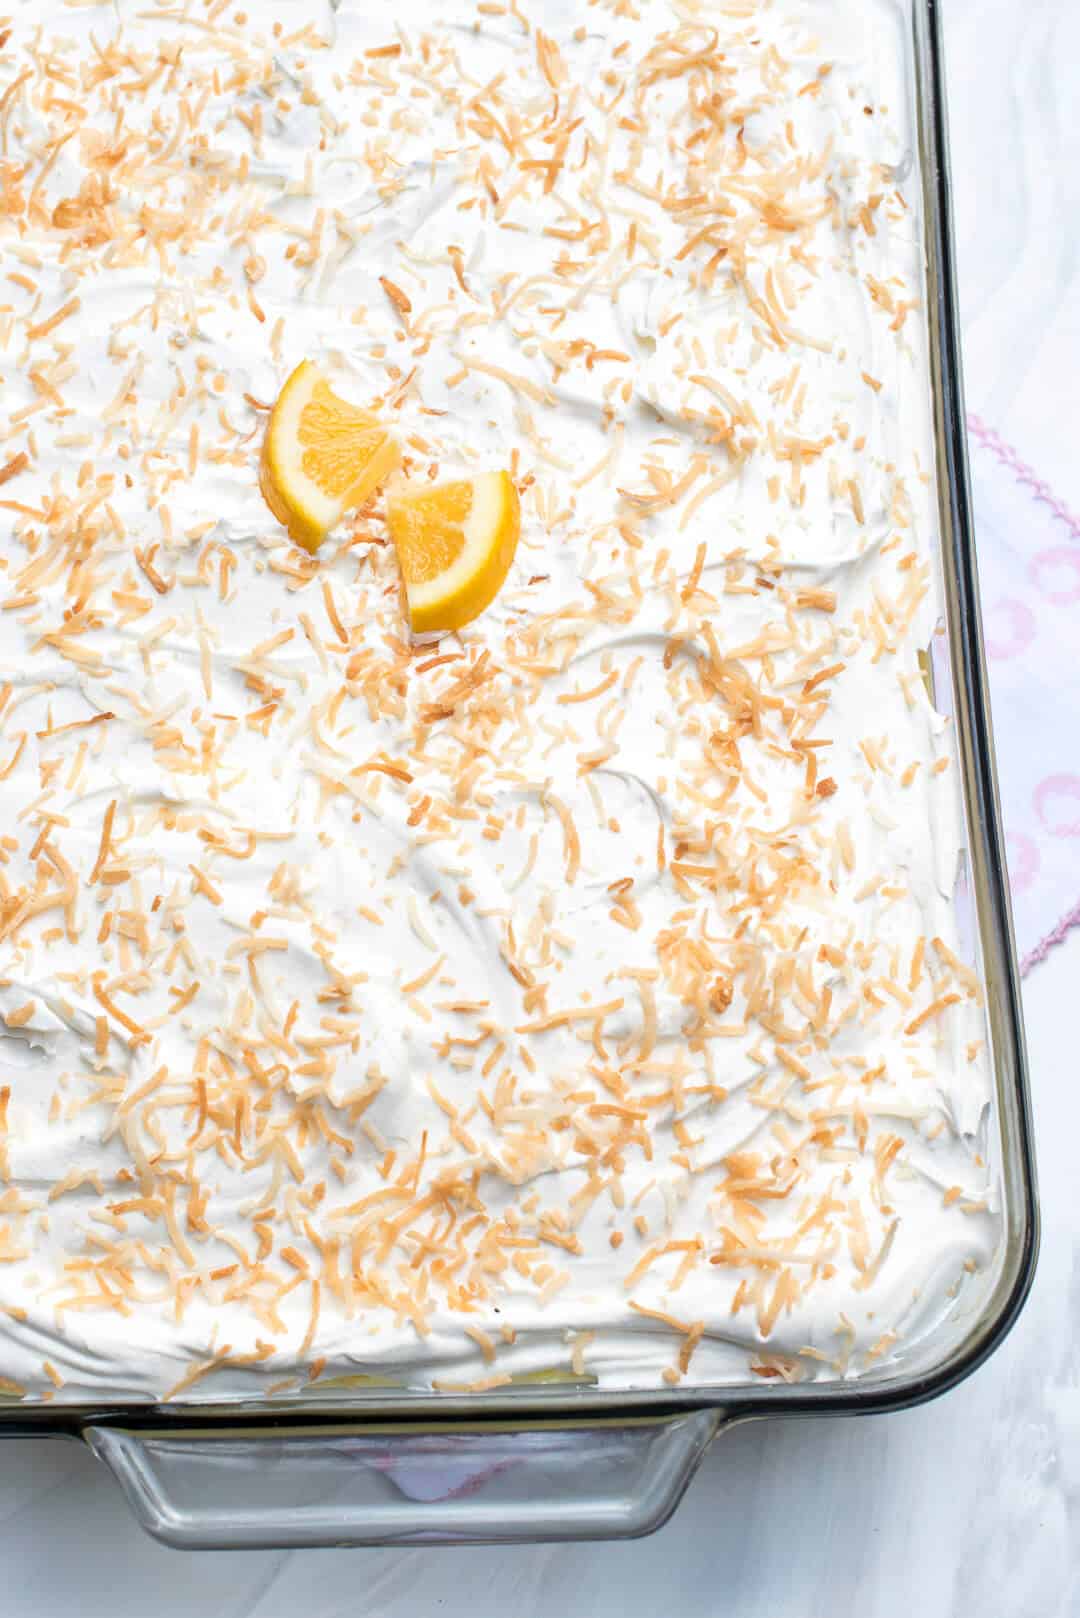 An over the top image of Lemon Coconut Poppy Seed Cake in a glass baking dish with toasted coconut and fresh lemon slices on top.